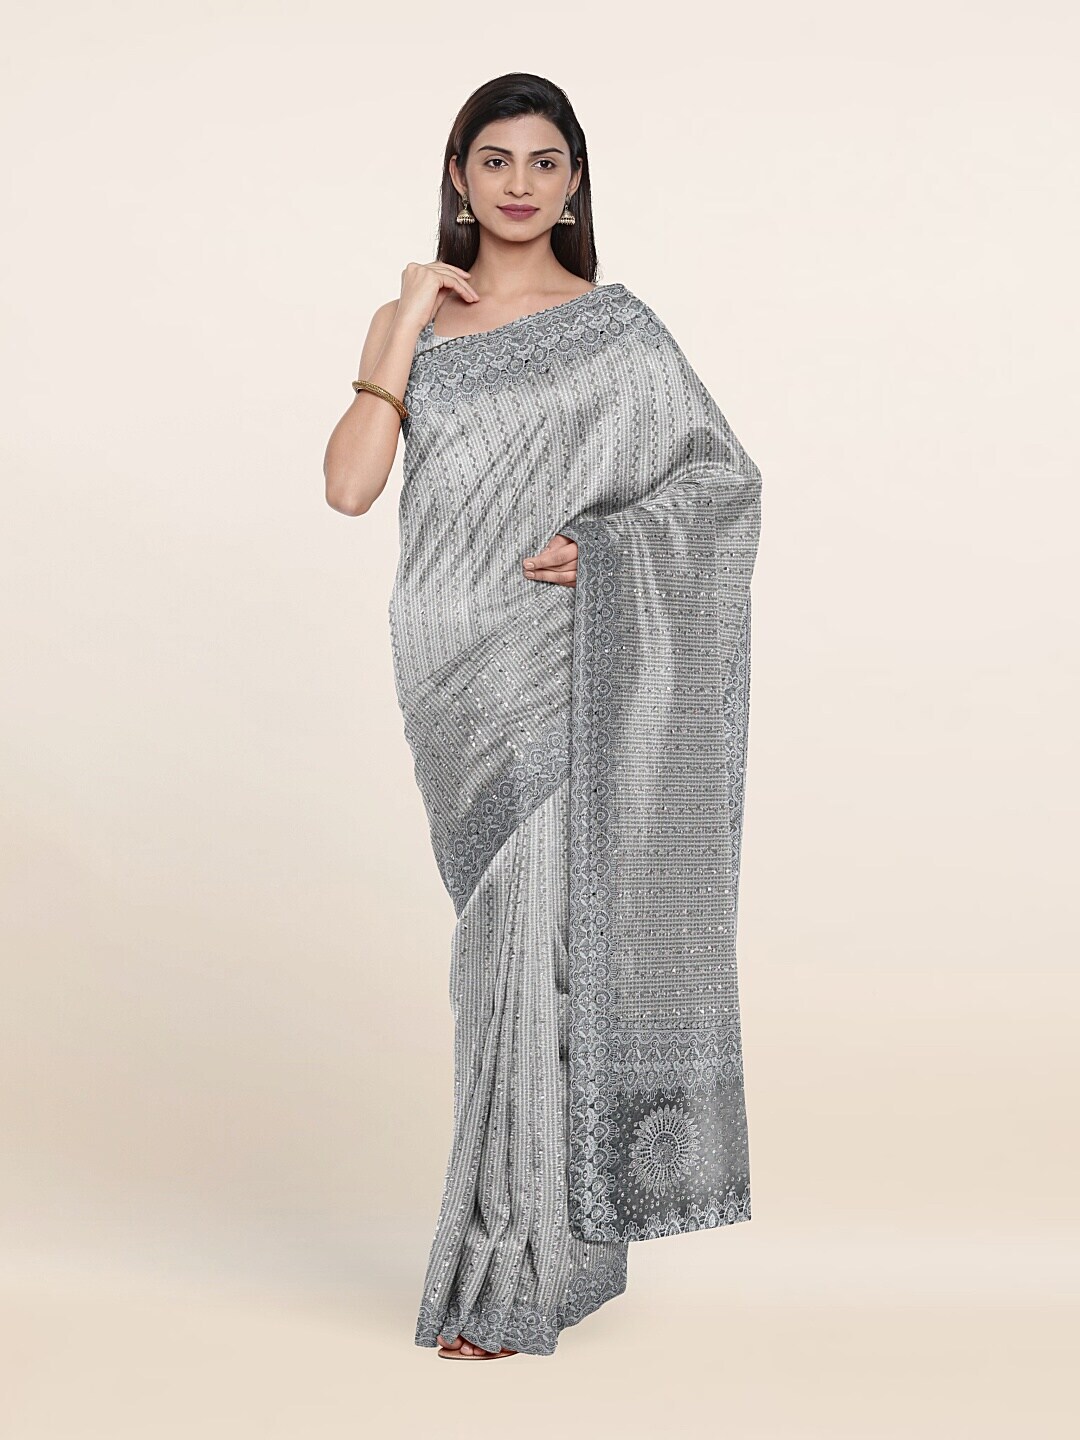 Pothys Grey Striped Beads and Stones Saree Price in India